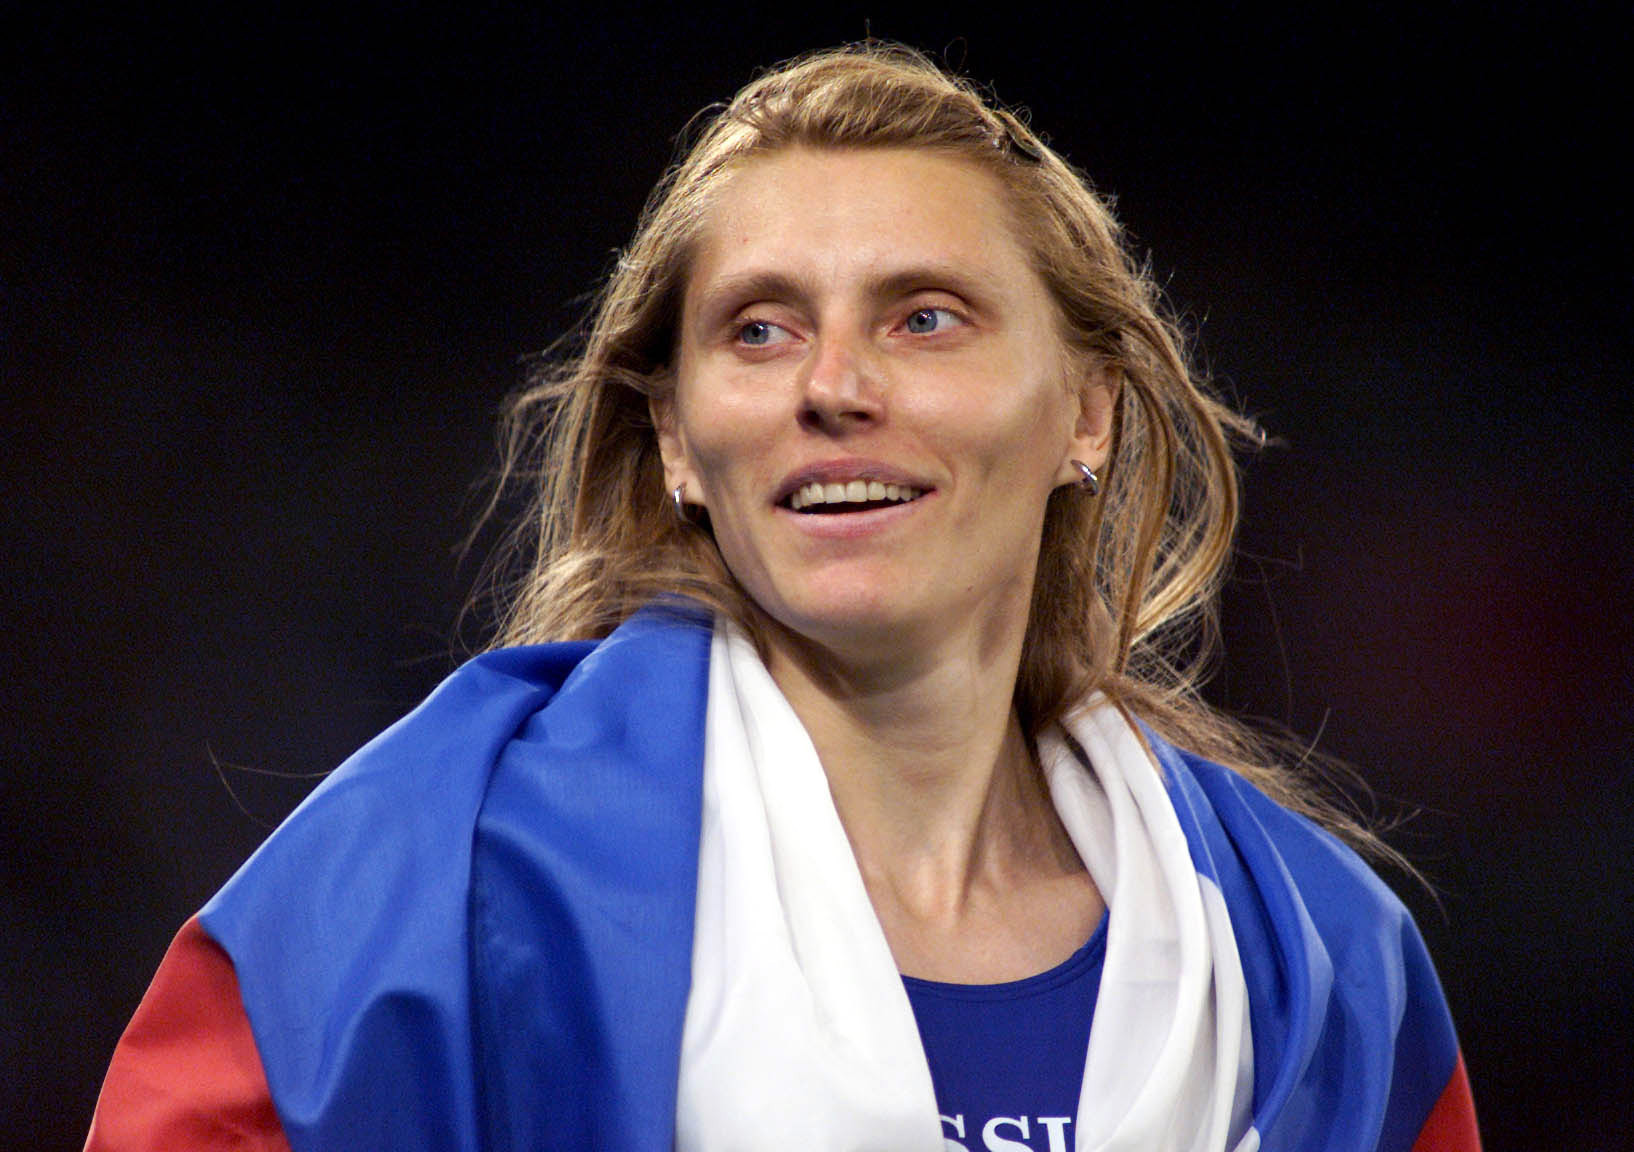 Irina Privalova is Acting President of the Russian Athletics Federation ©Getty Images